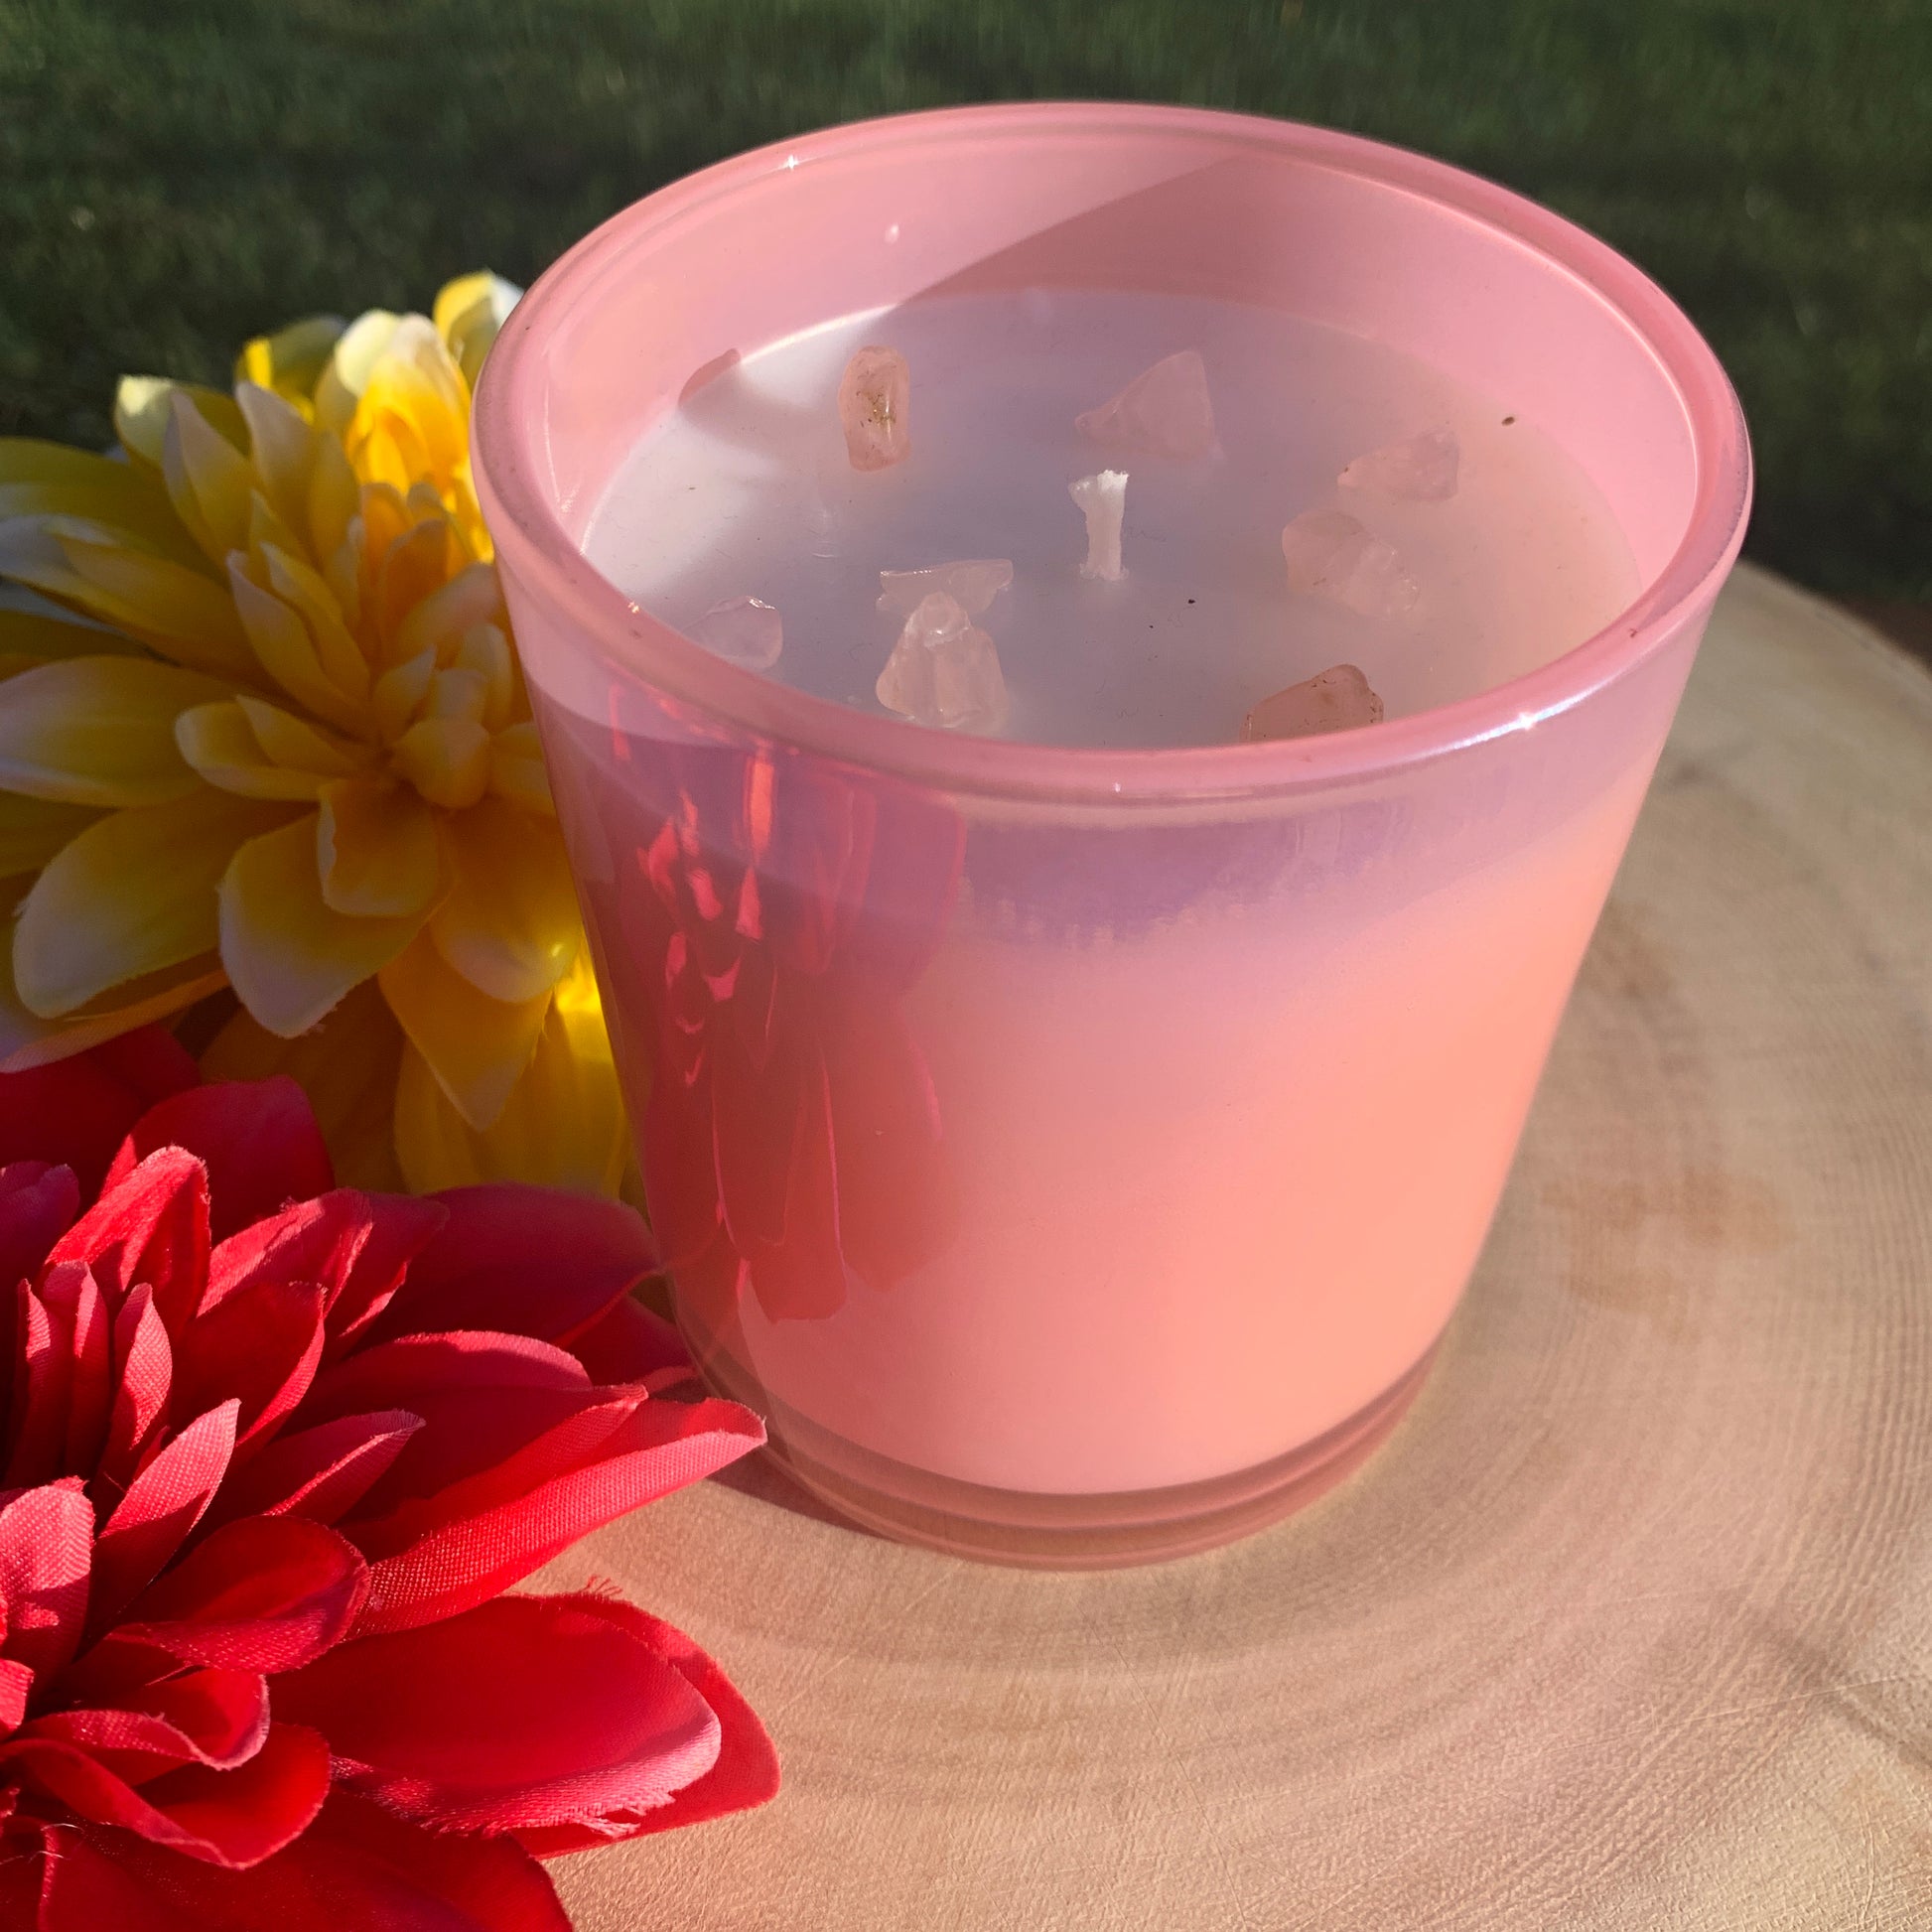 🕯️This photo shows the blush-colored jar representing compassion, romance and femininity containing rose quartz, known as the stone of unconditional love that opens up the heart to increased affection, closeness, healing and self-love.🕯️